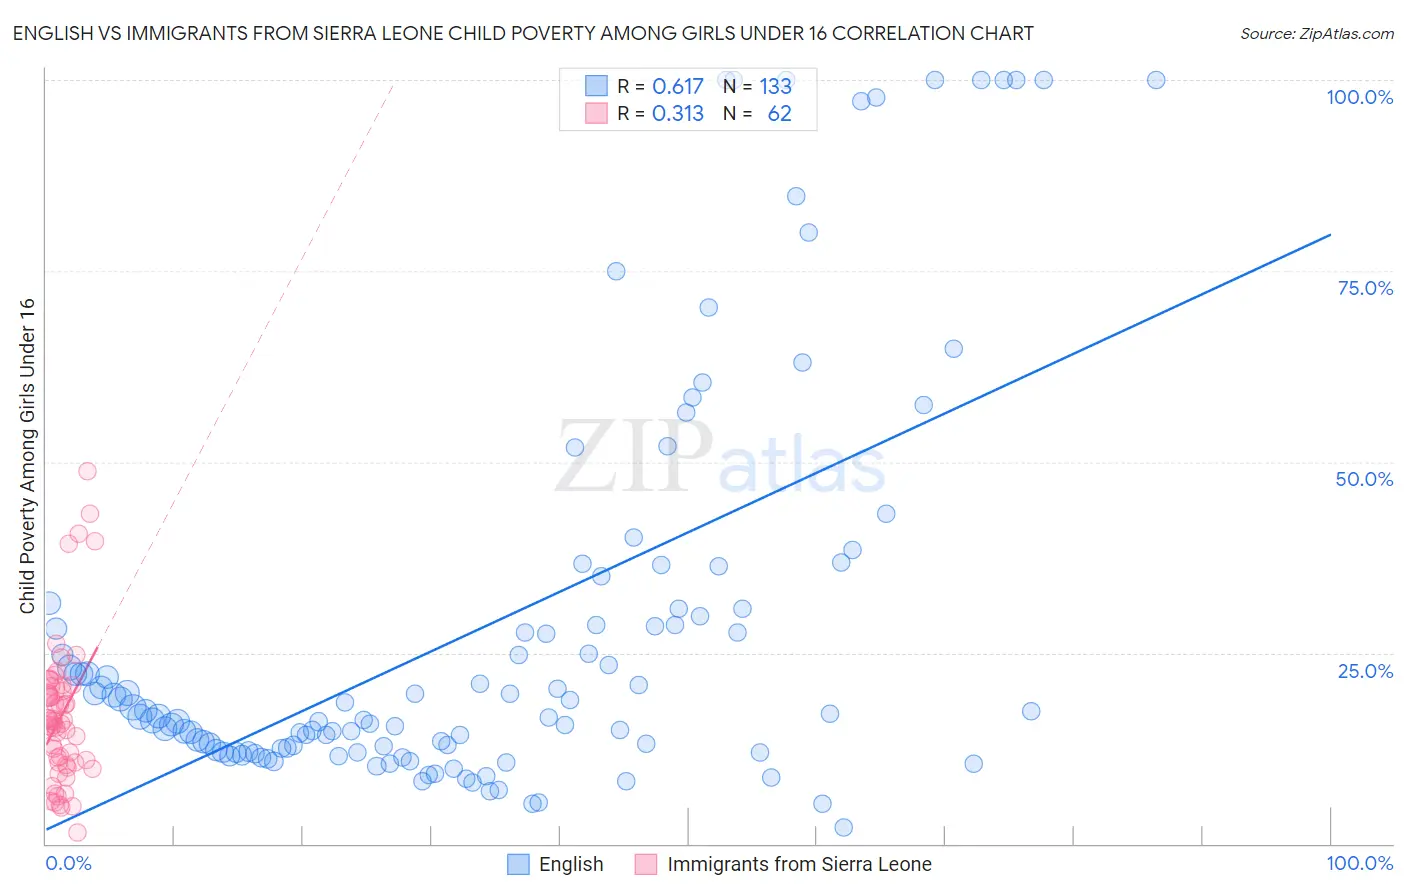 English vs Immigrants from Sierra Leone Child Poverty Among Girls Under 16